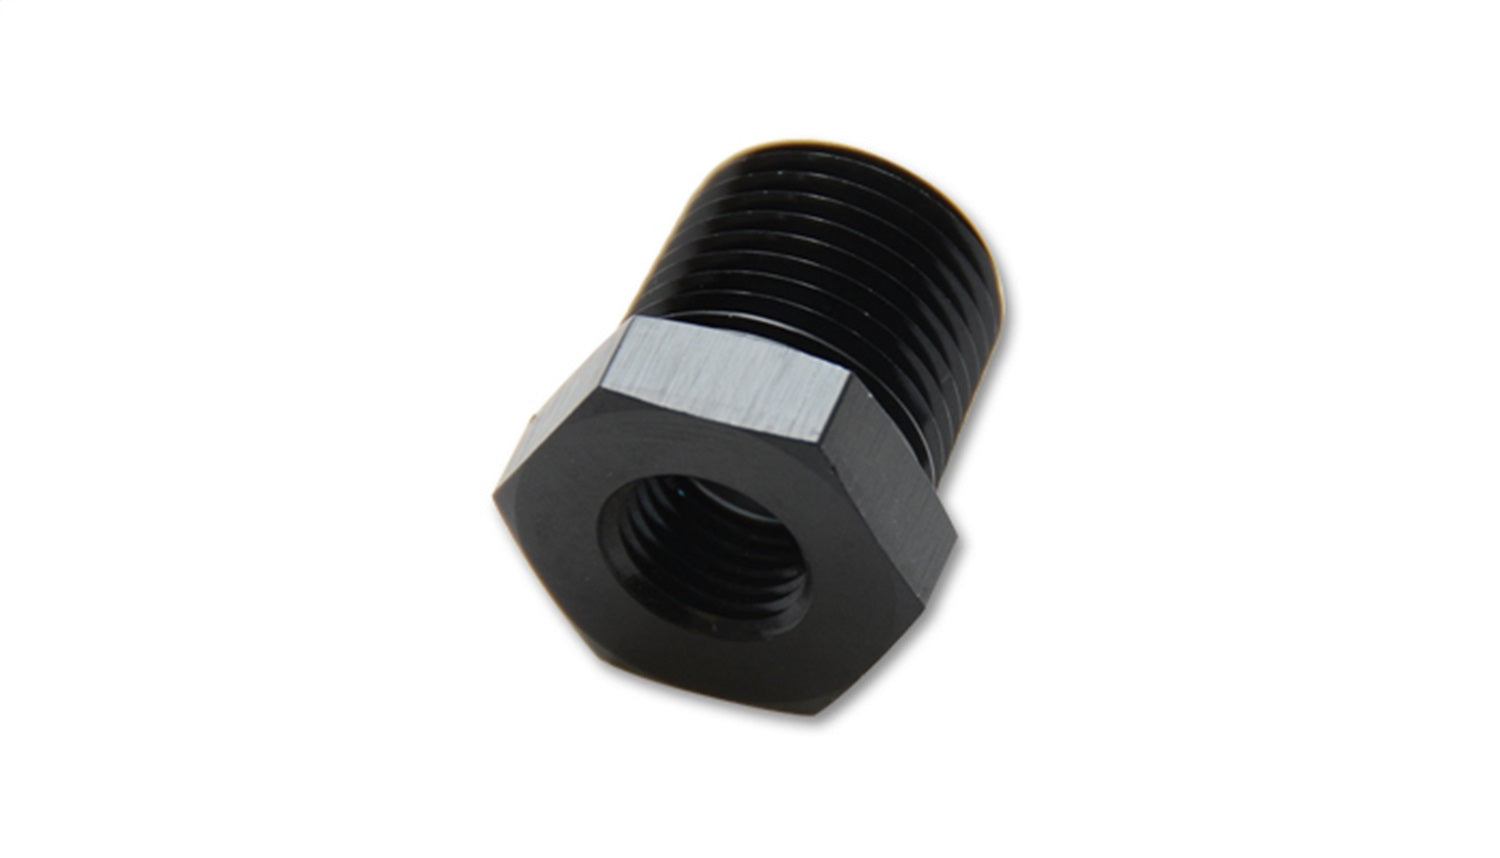 Vibrant Performance Pipe Reducer Adapter Fitting; Size: 1/4" NPT Female to 1/2" NPT Male